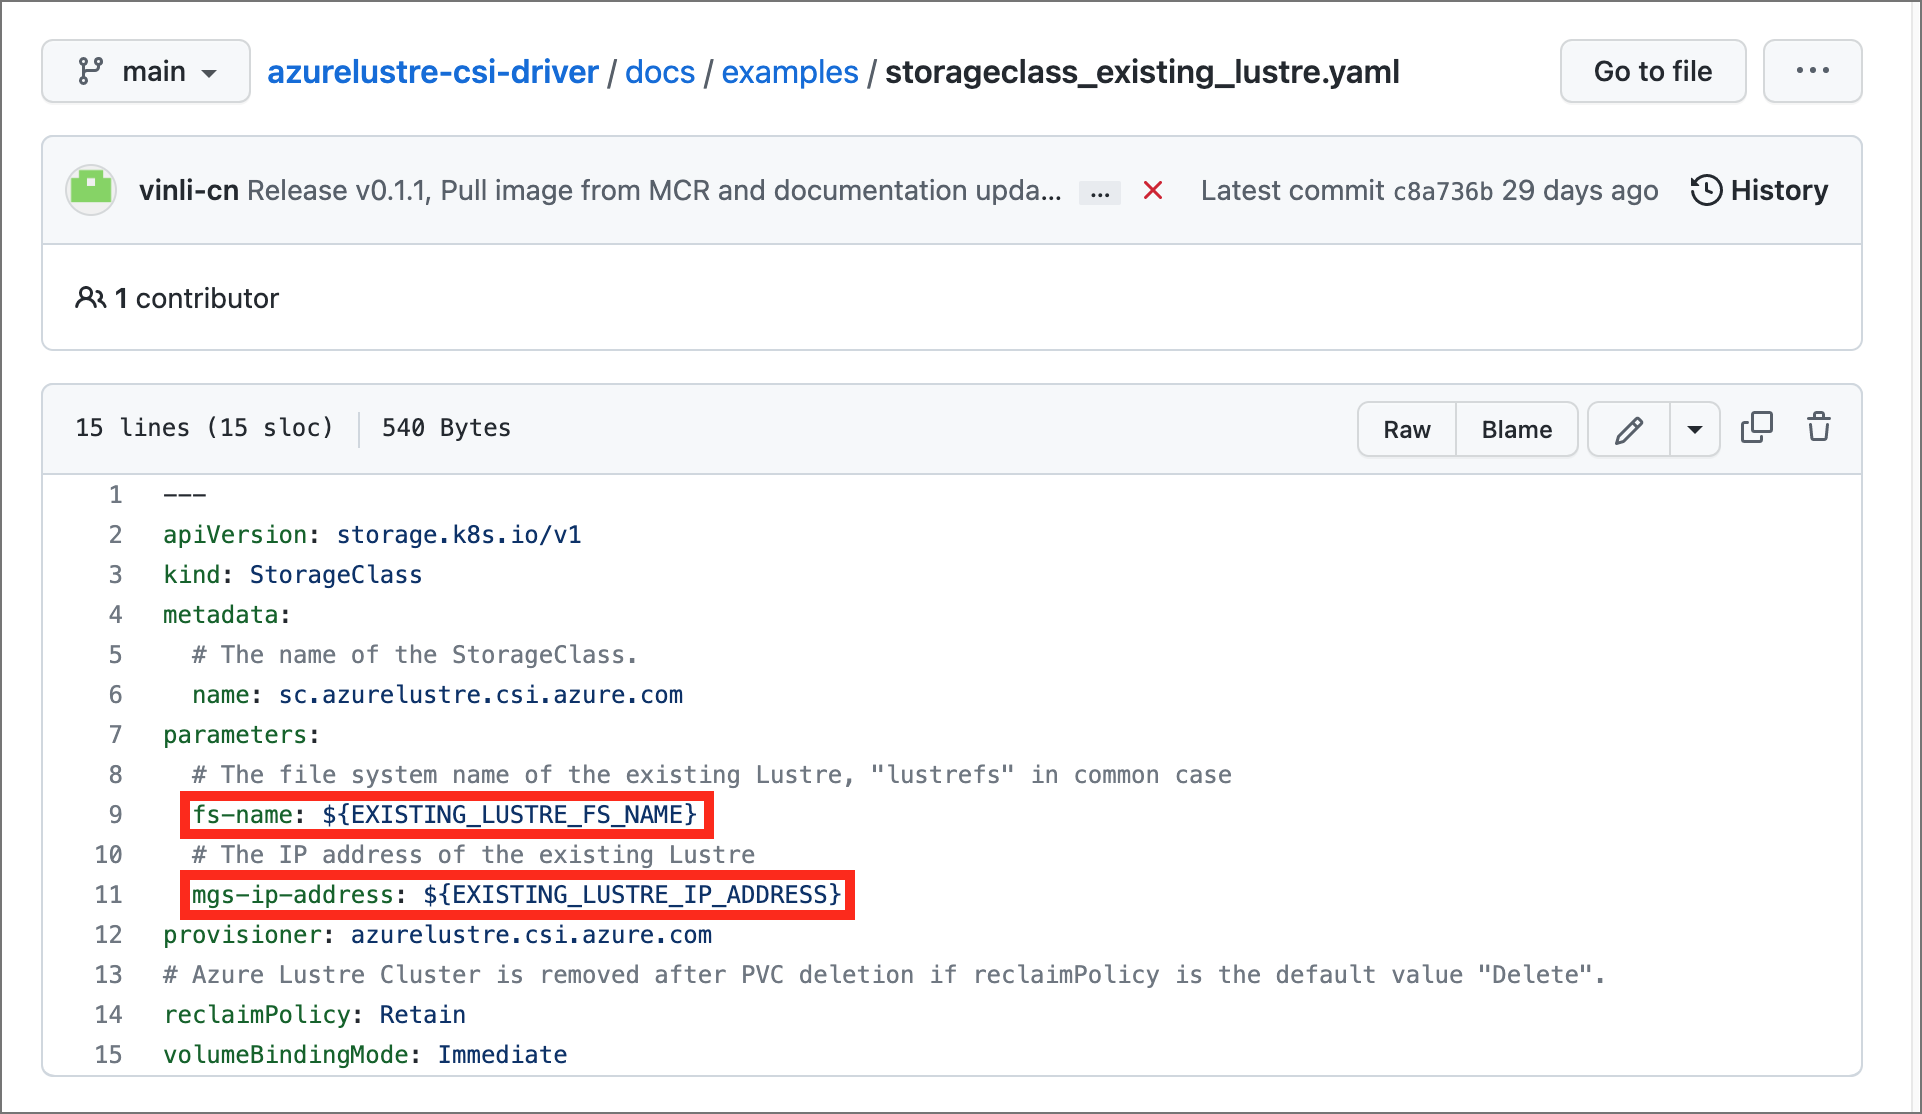 Screenshot of storageclass_existing_lustre.yaml file with values to replace highlighted.